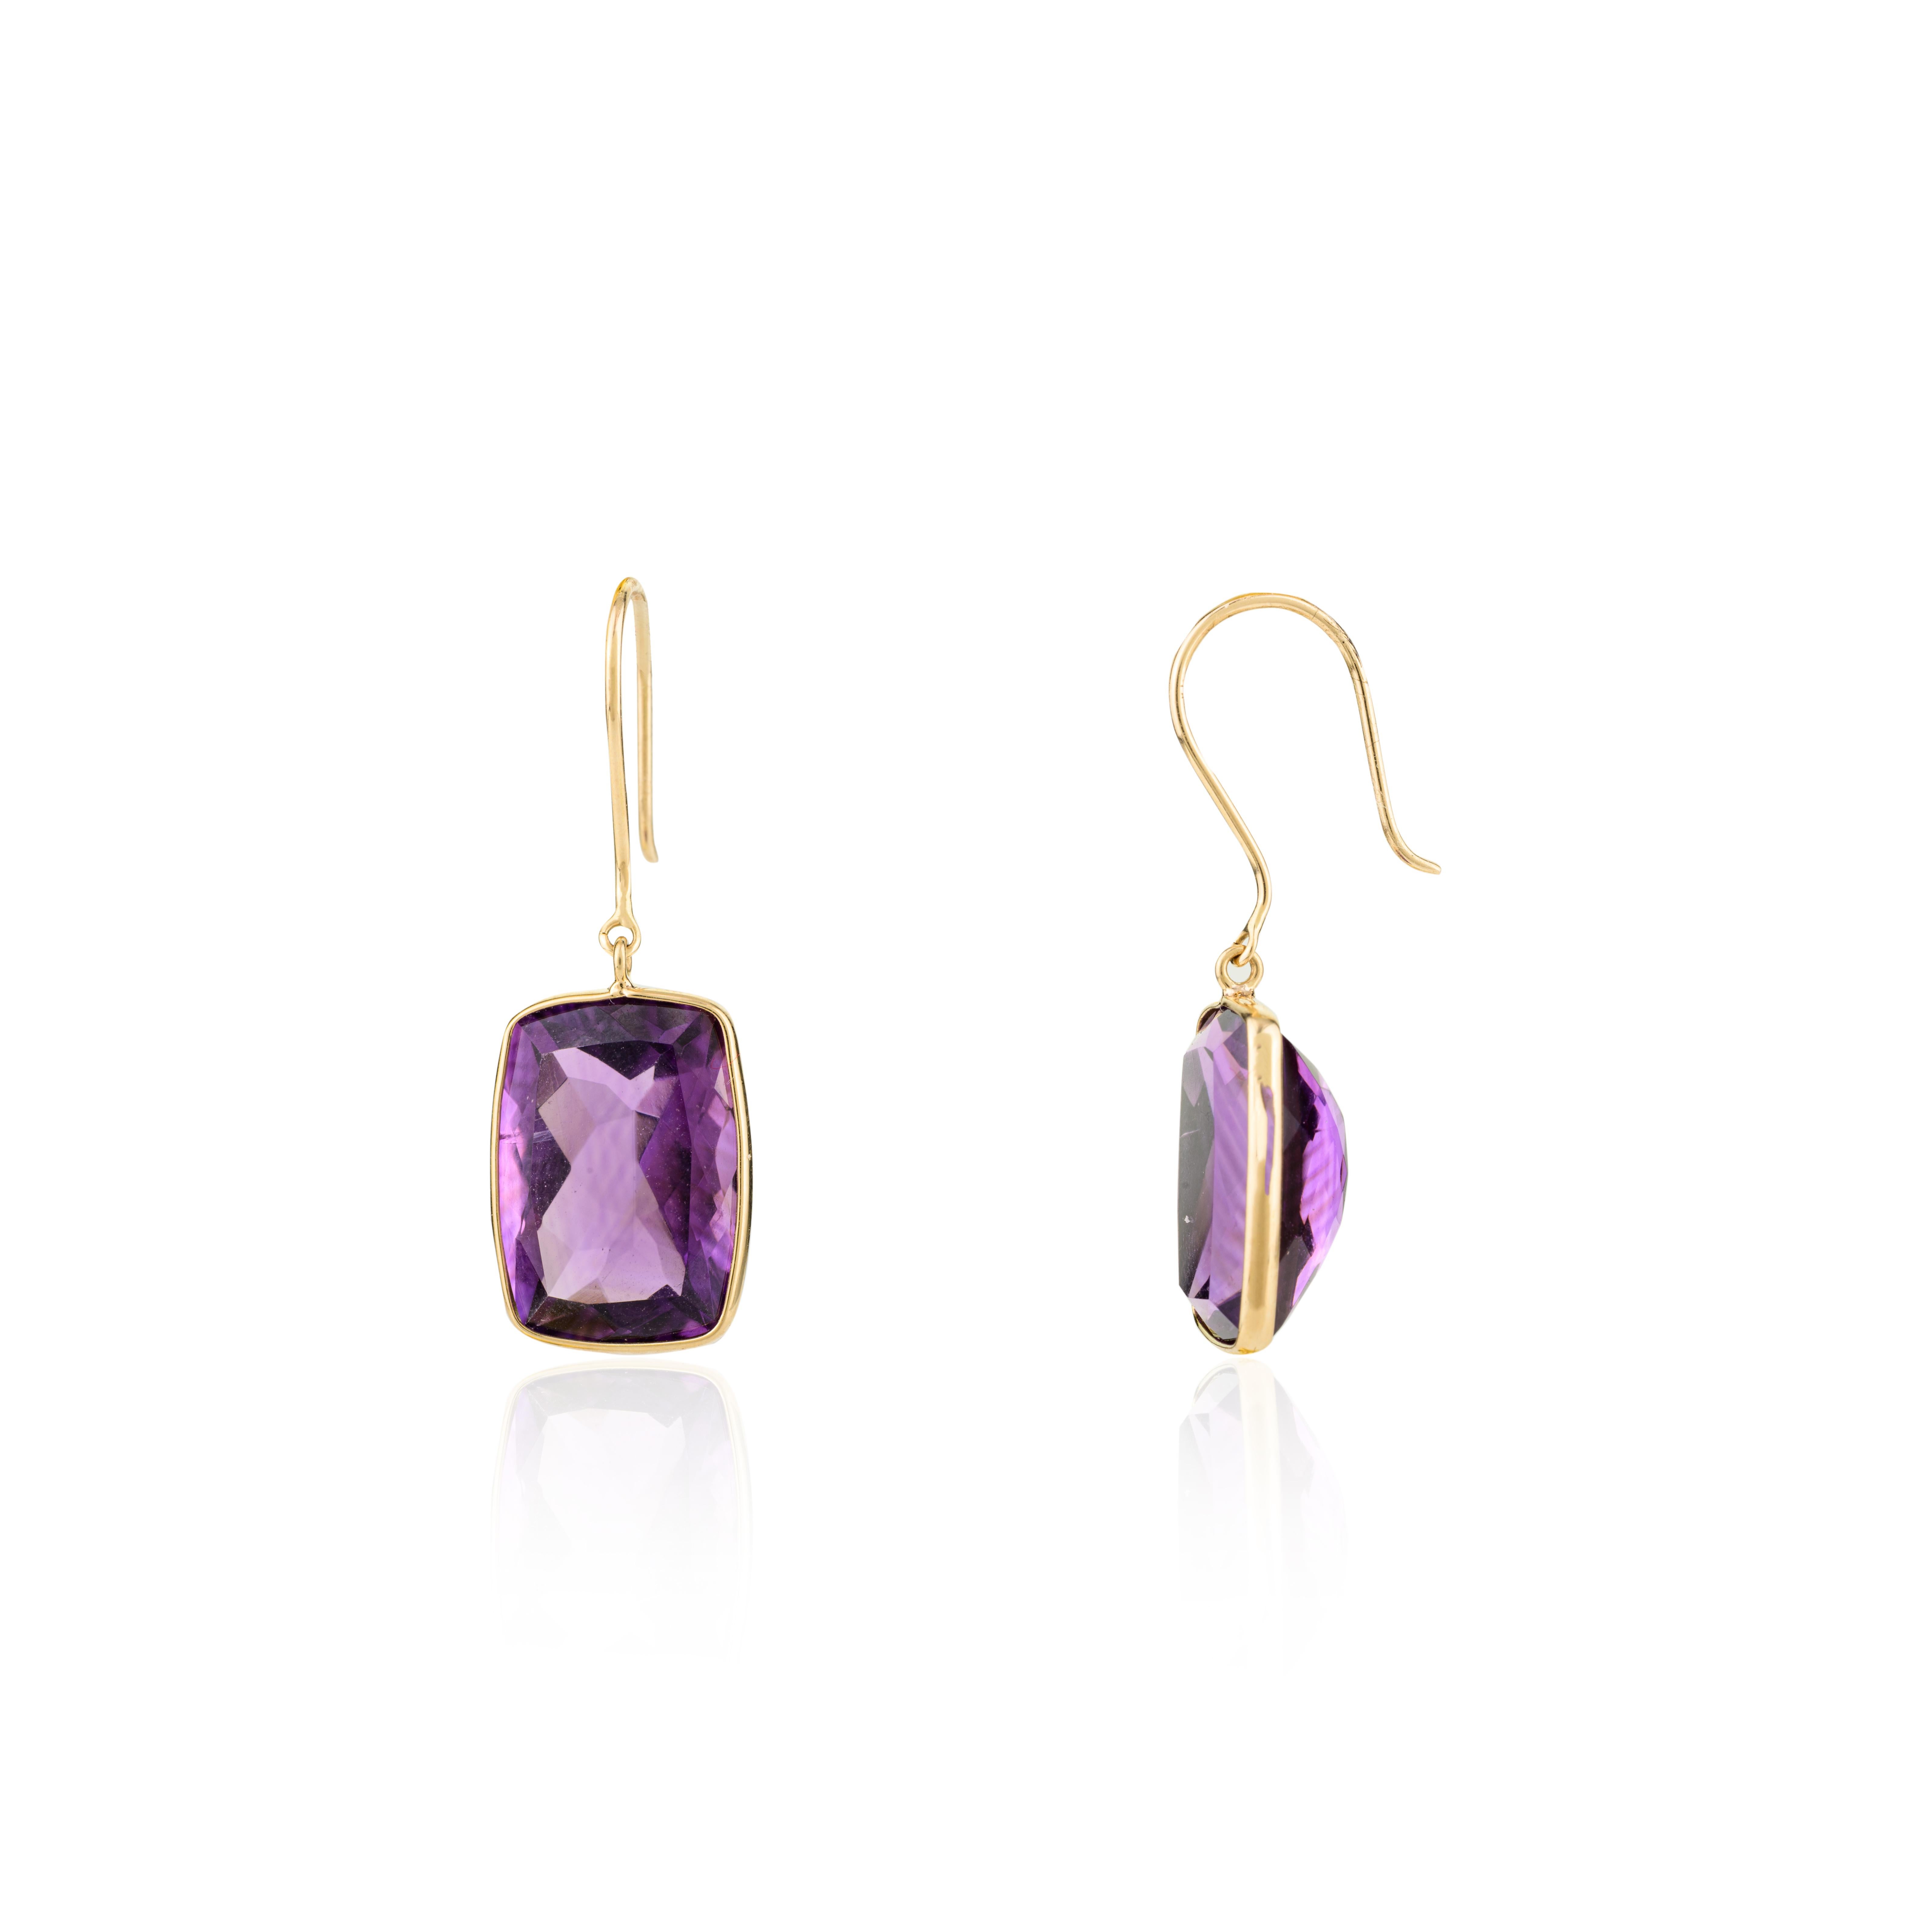 Handmade Amethyst Drop Earrings Gift for Mom in 18k Solid Yellow Gold In New Condition For Sale In Houston, TX